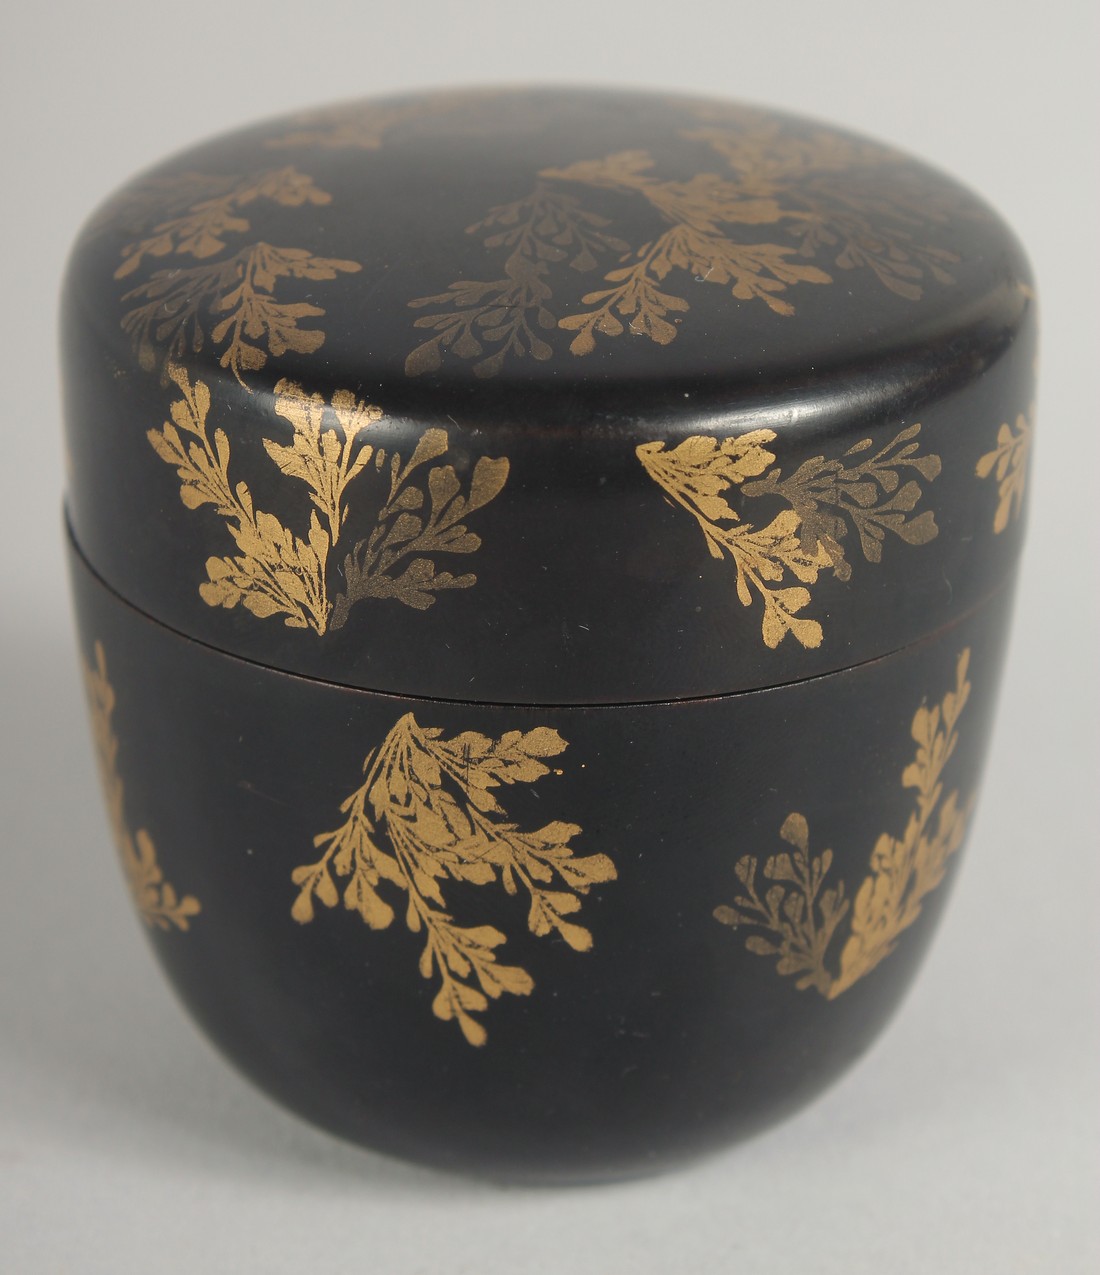 A JAPANESE LACQUER NATSUME / TEA CADDY, decorated with gold foliage, 6cm high. - Image 3 of 4